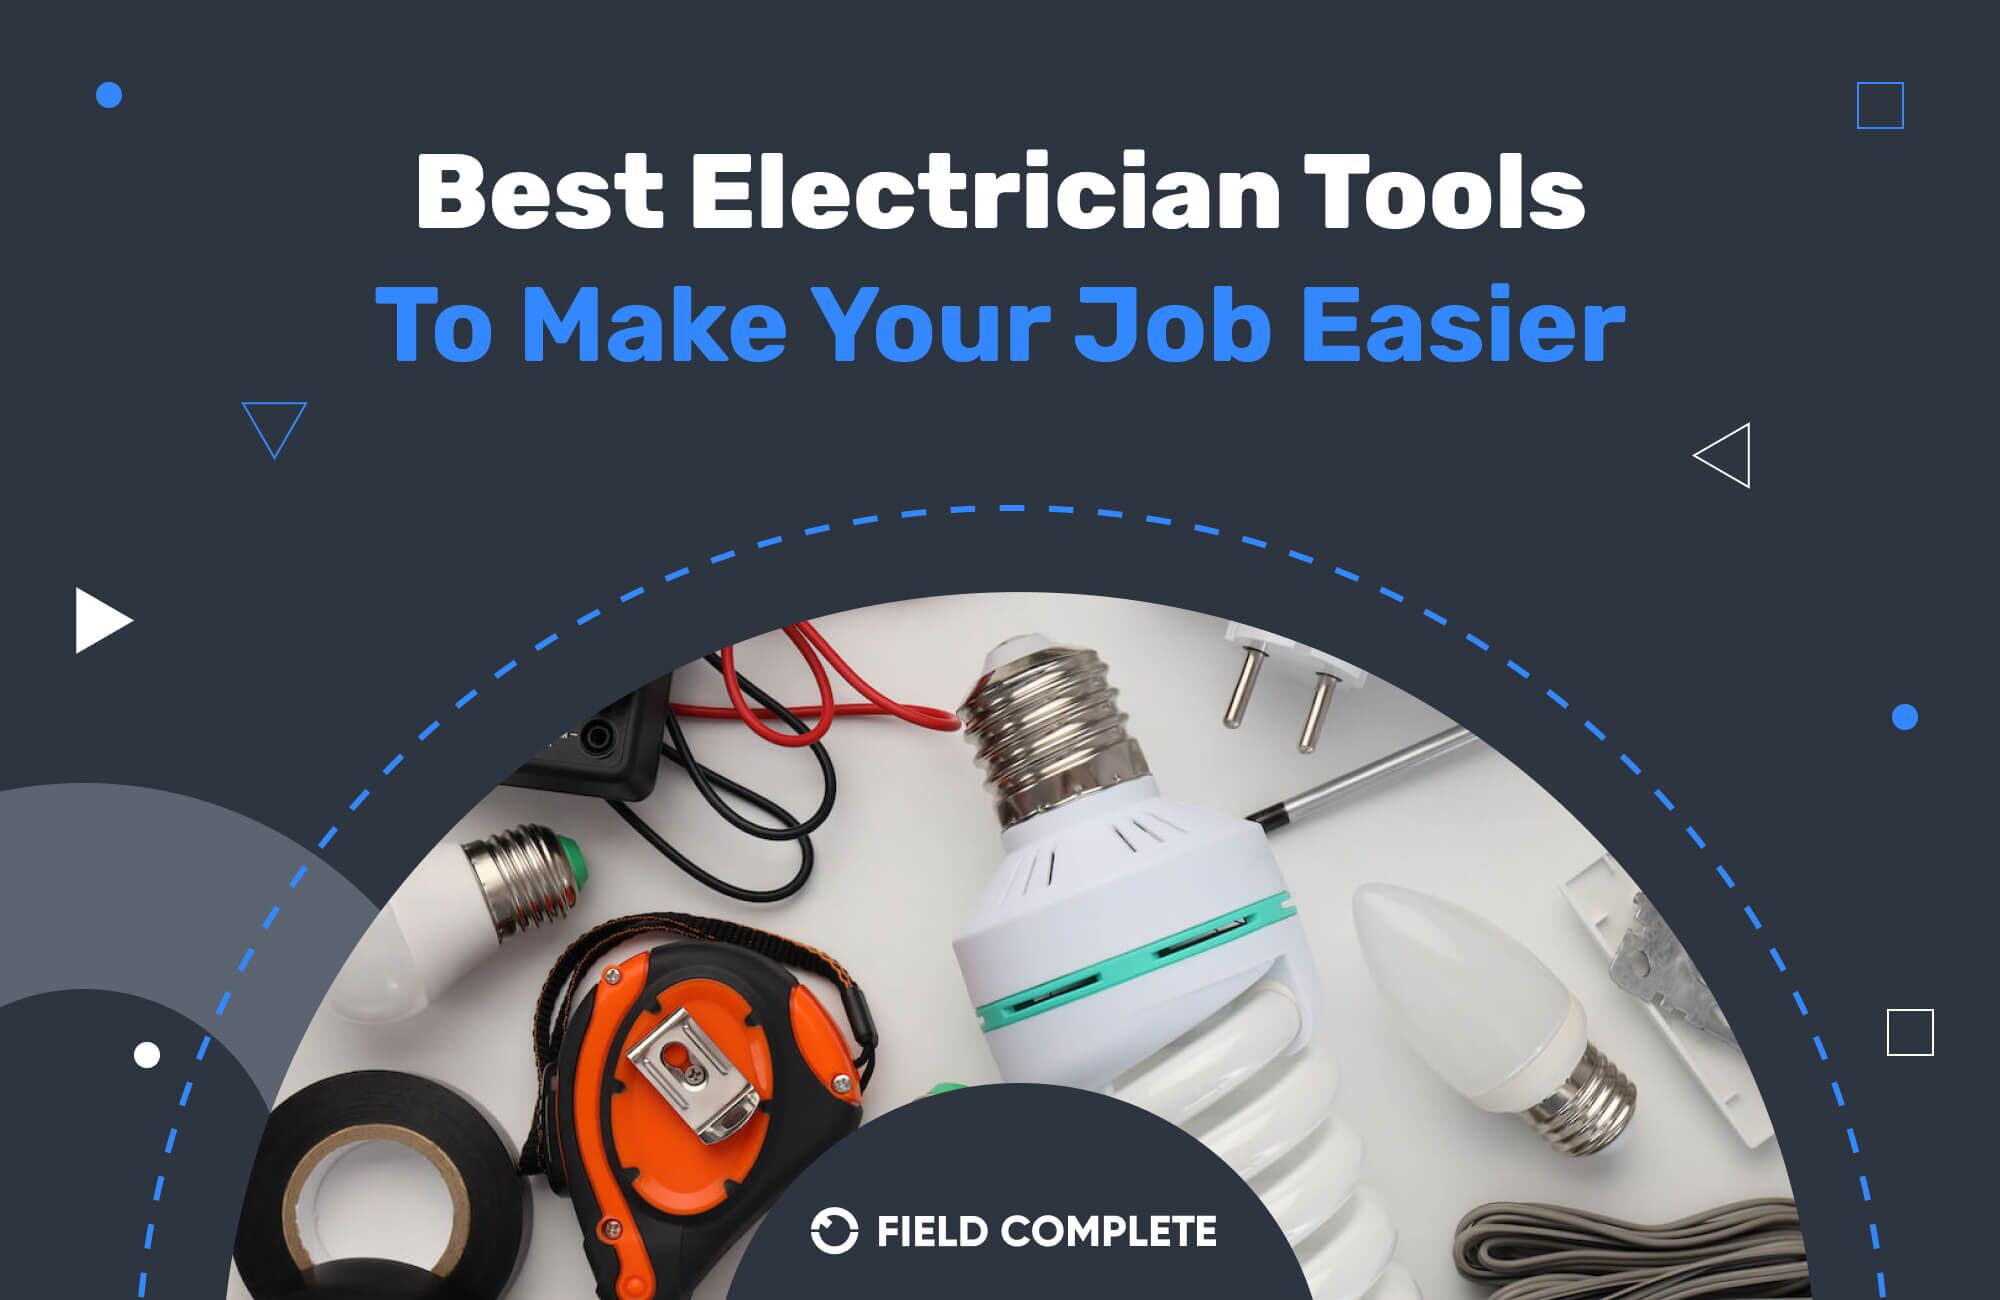 Best Electrician Tools To Make Your Job Easier